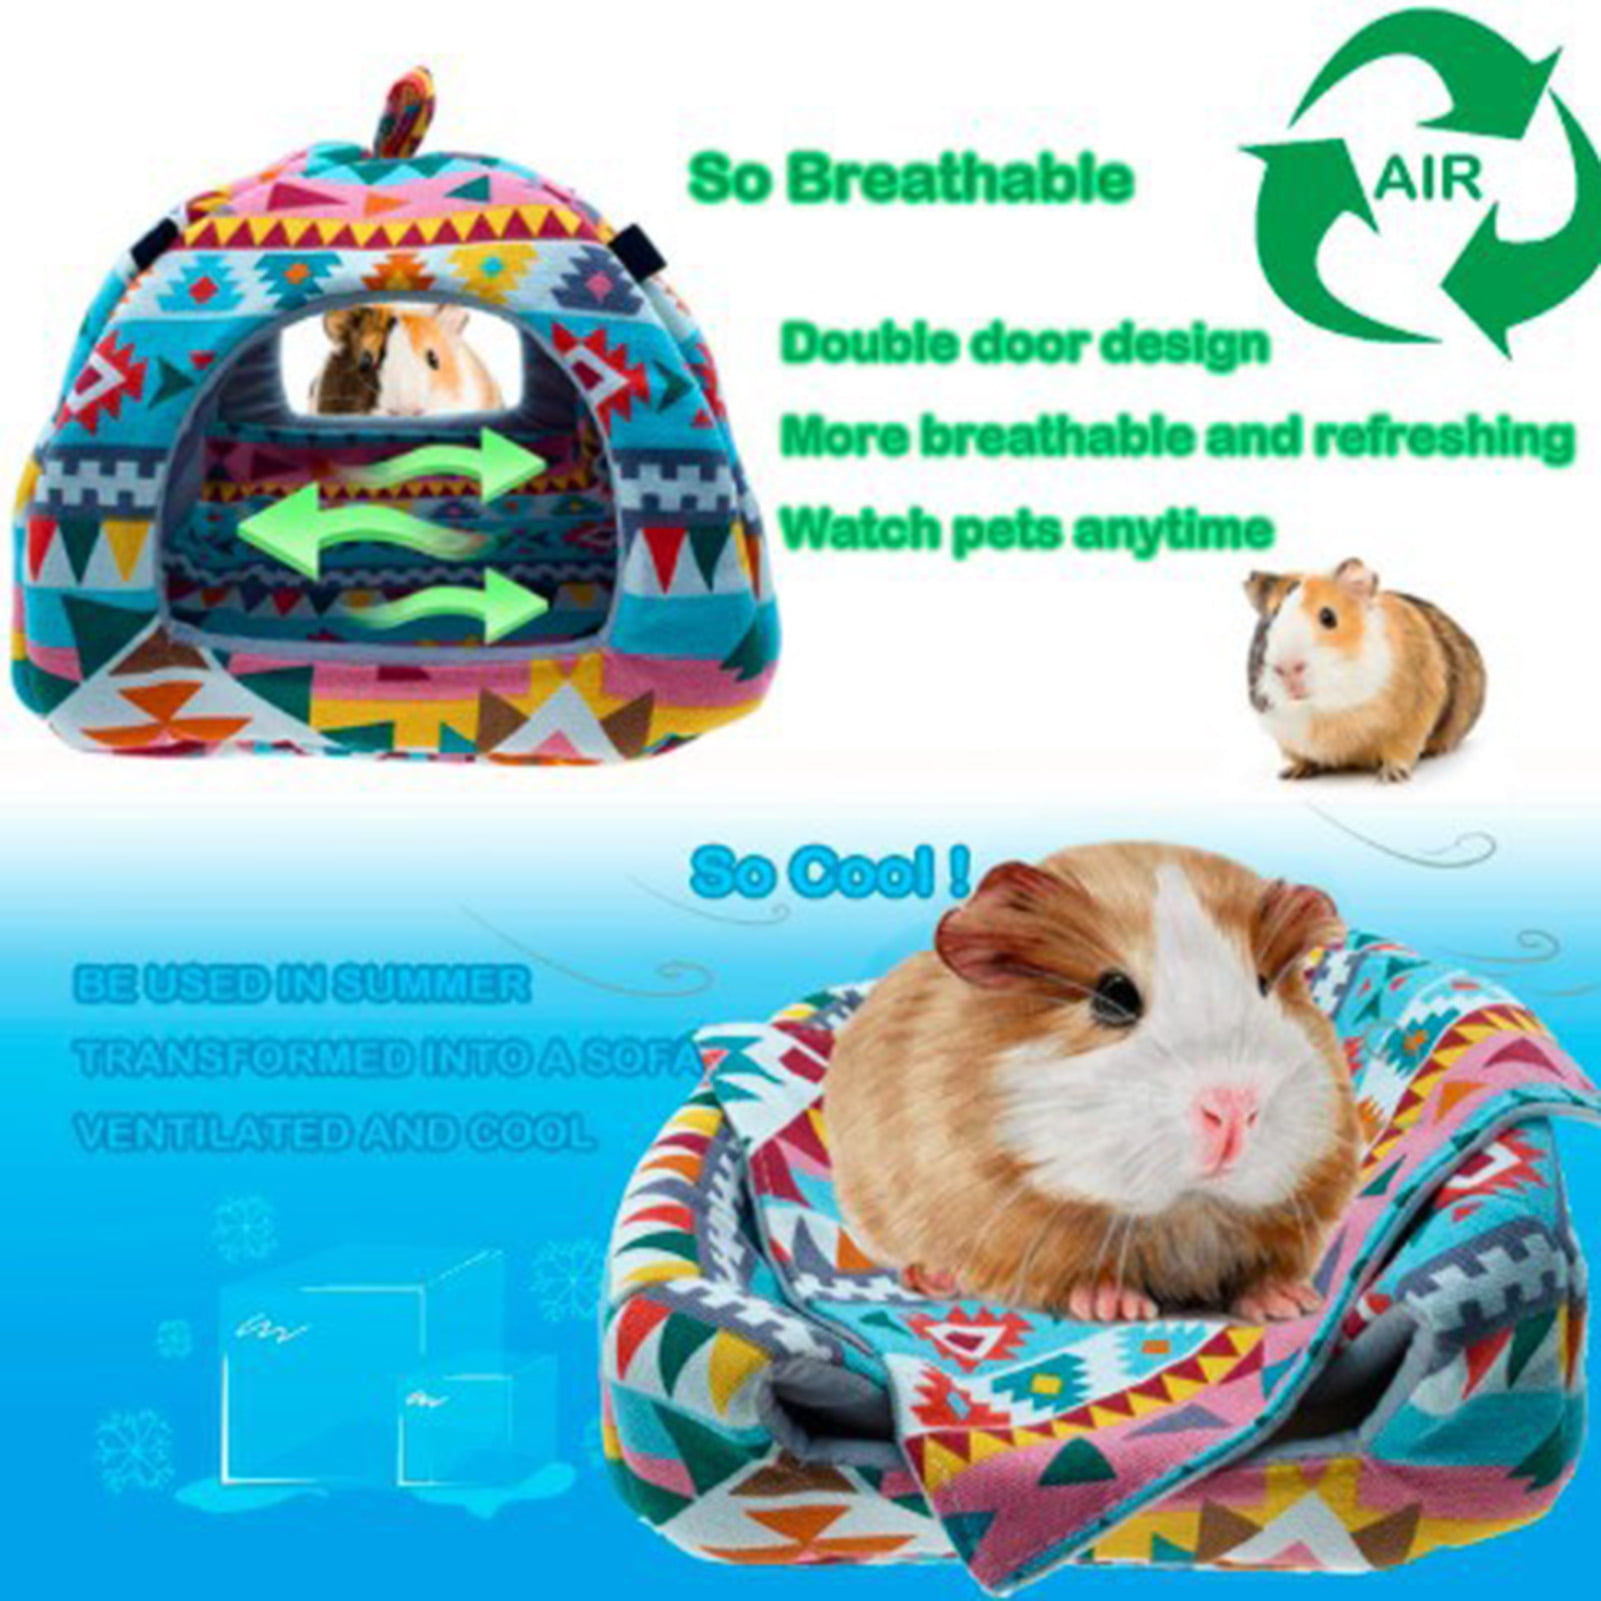 Guinea Pig Hamster Bird Squirrel Ferret Suger Glider Hedgehog Chinchillas Bed Hammock Winter Warm Small Pet Animal Hanging Home House Cotton Cage Nest Tent Ethnic style + mat, extra large 8.66 inch 